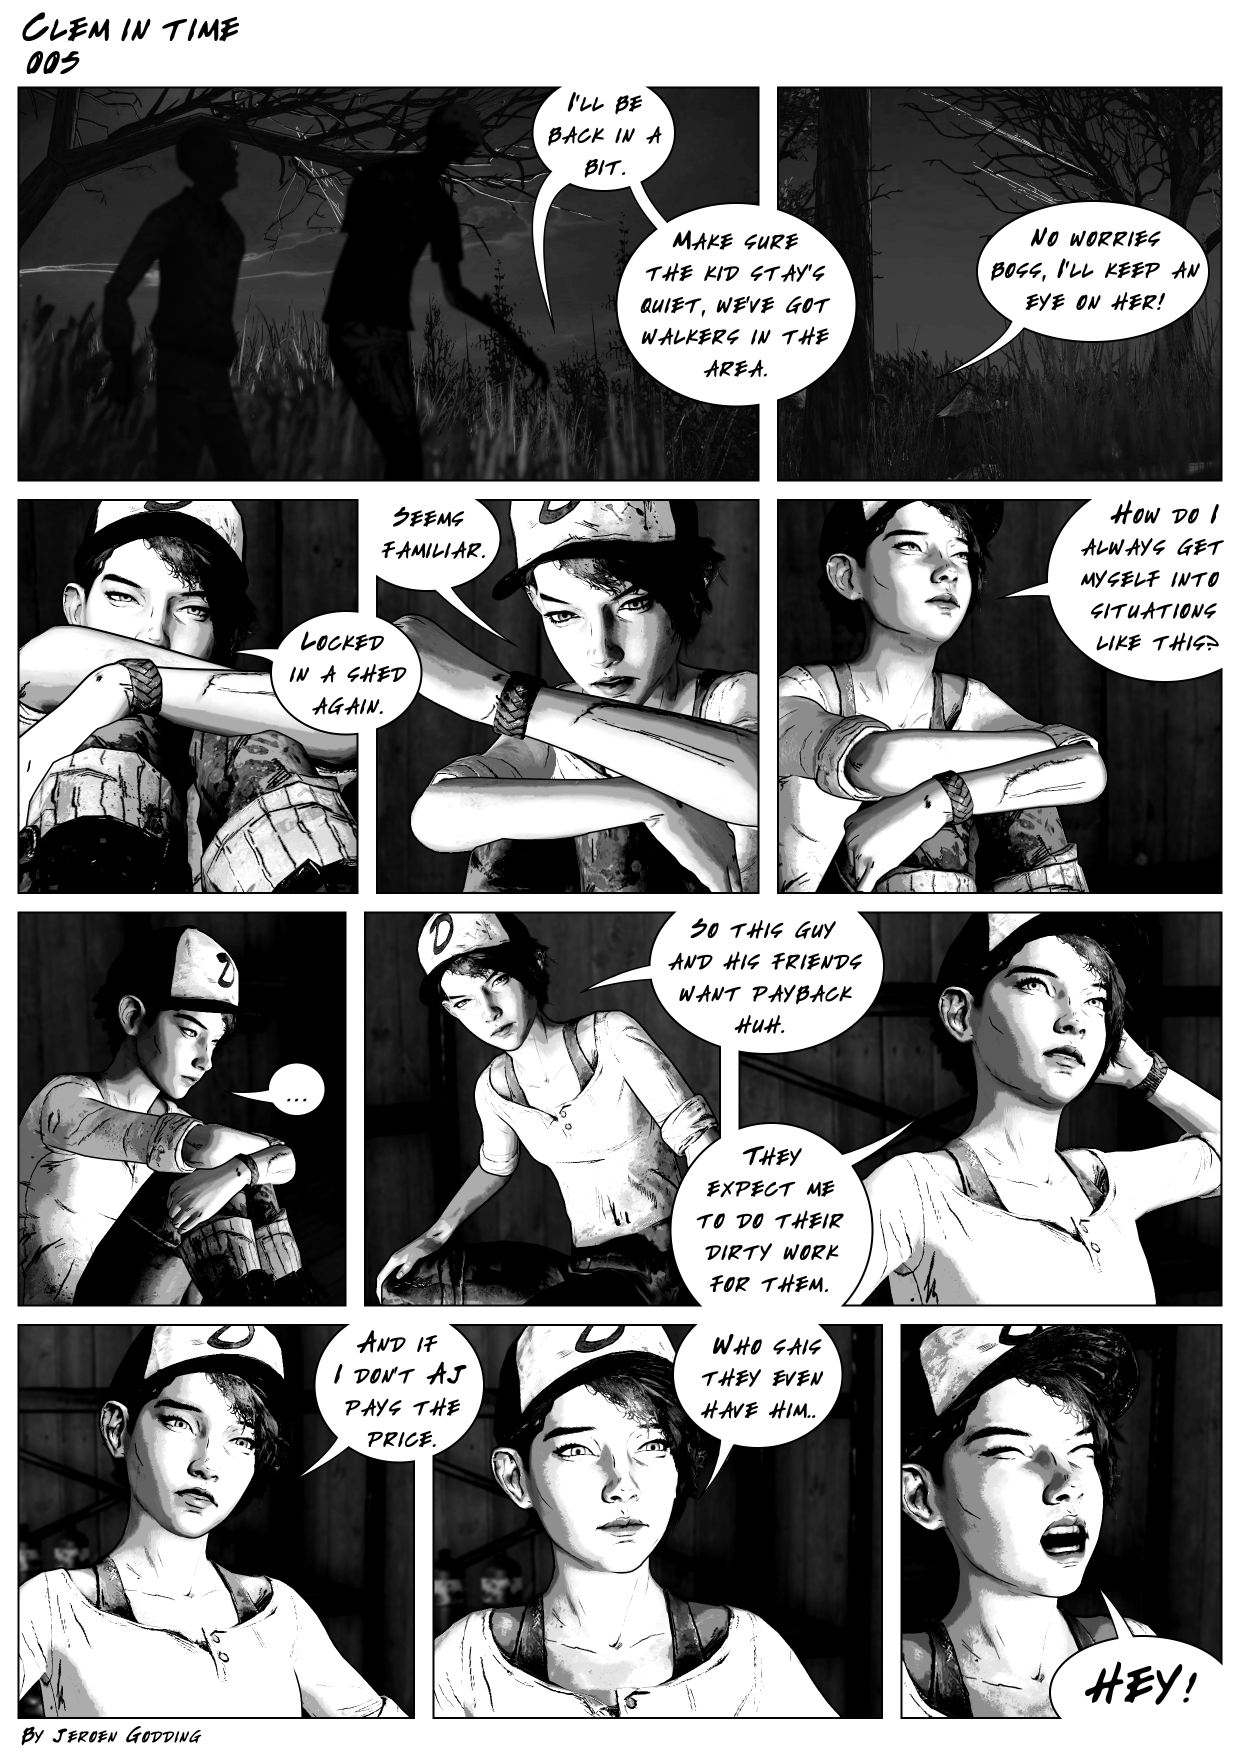 Walking Fan Art Of The Dead New And Improved Page 124 — Telltale Community